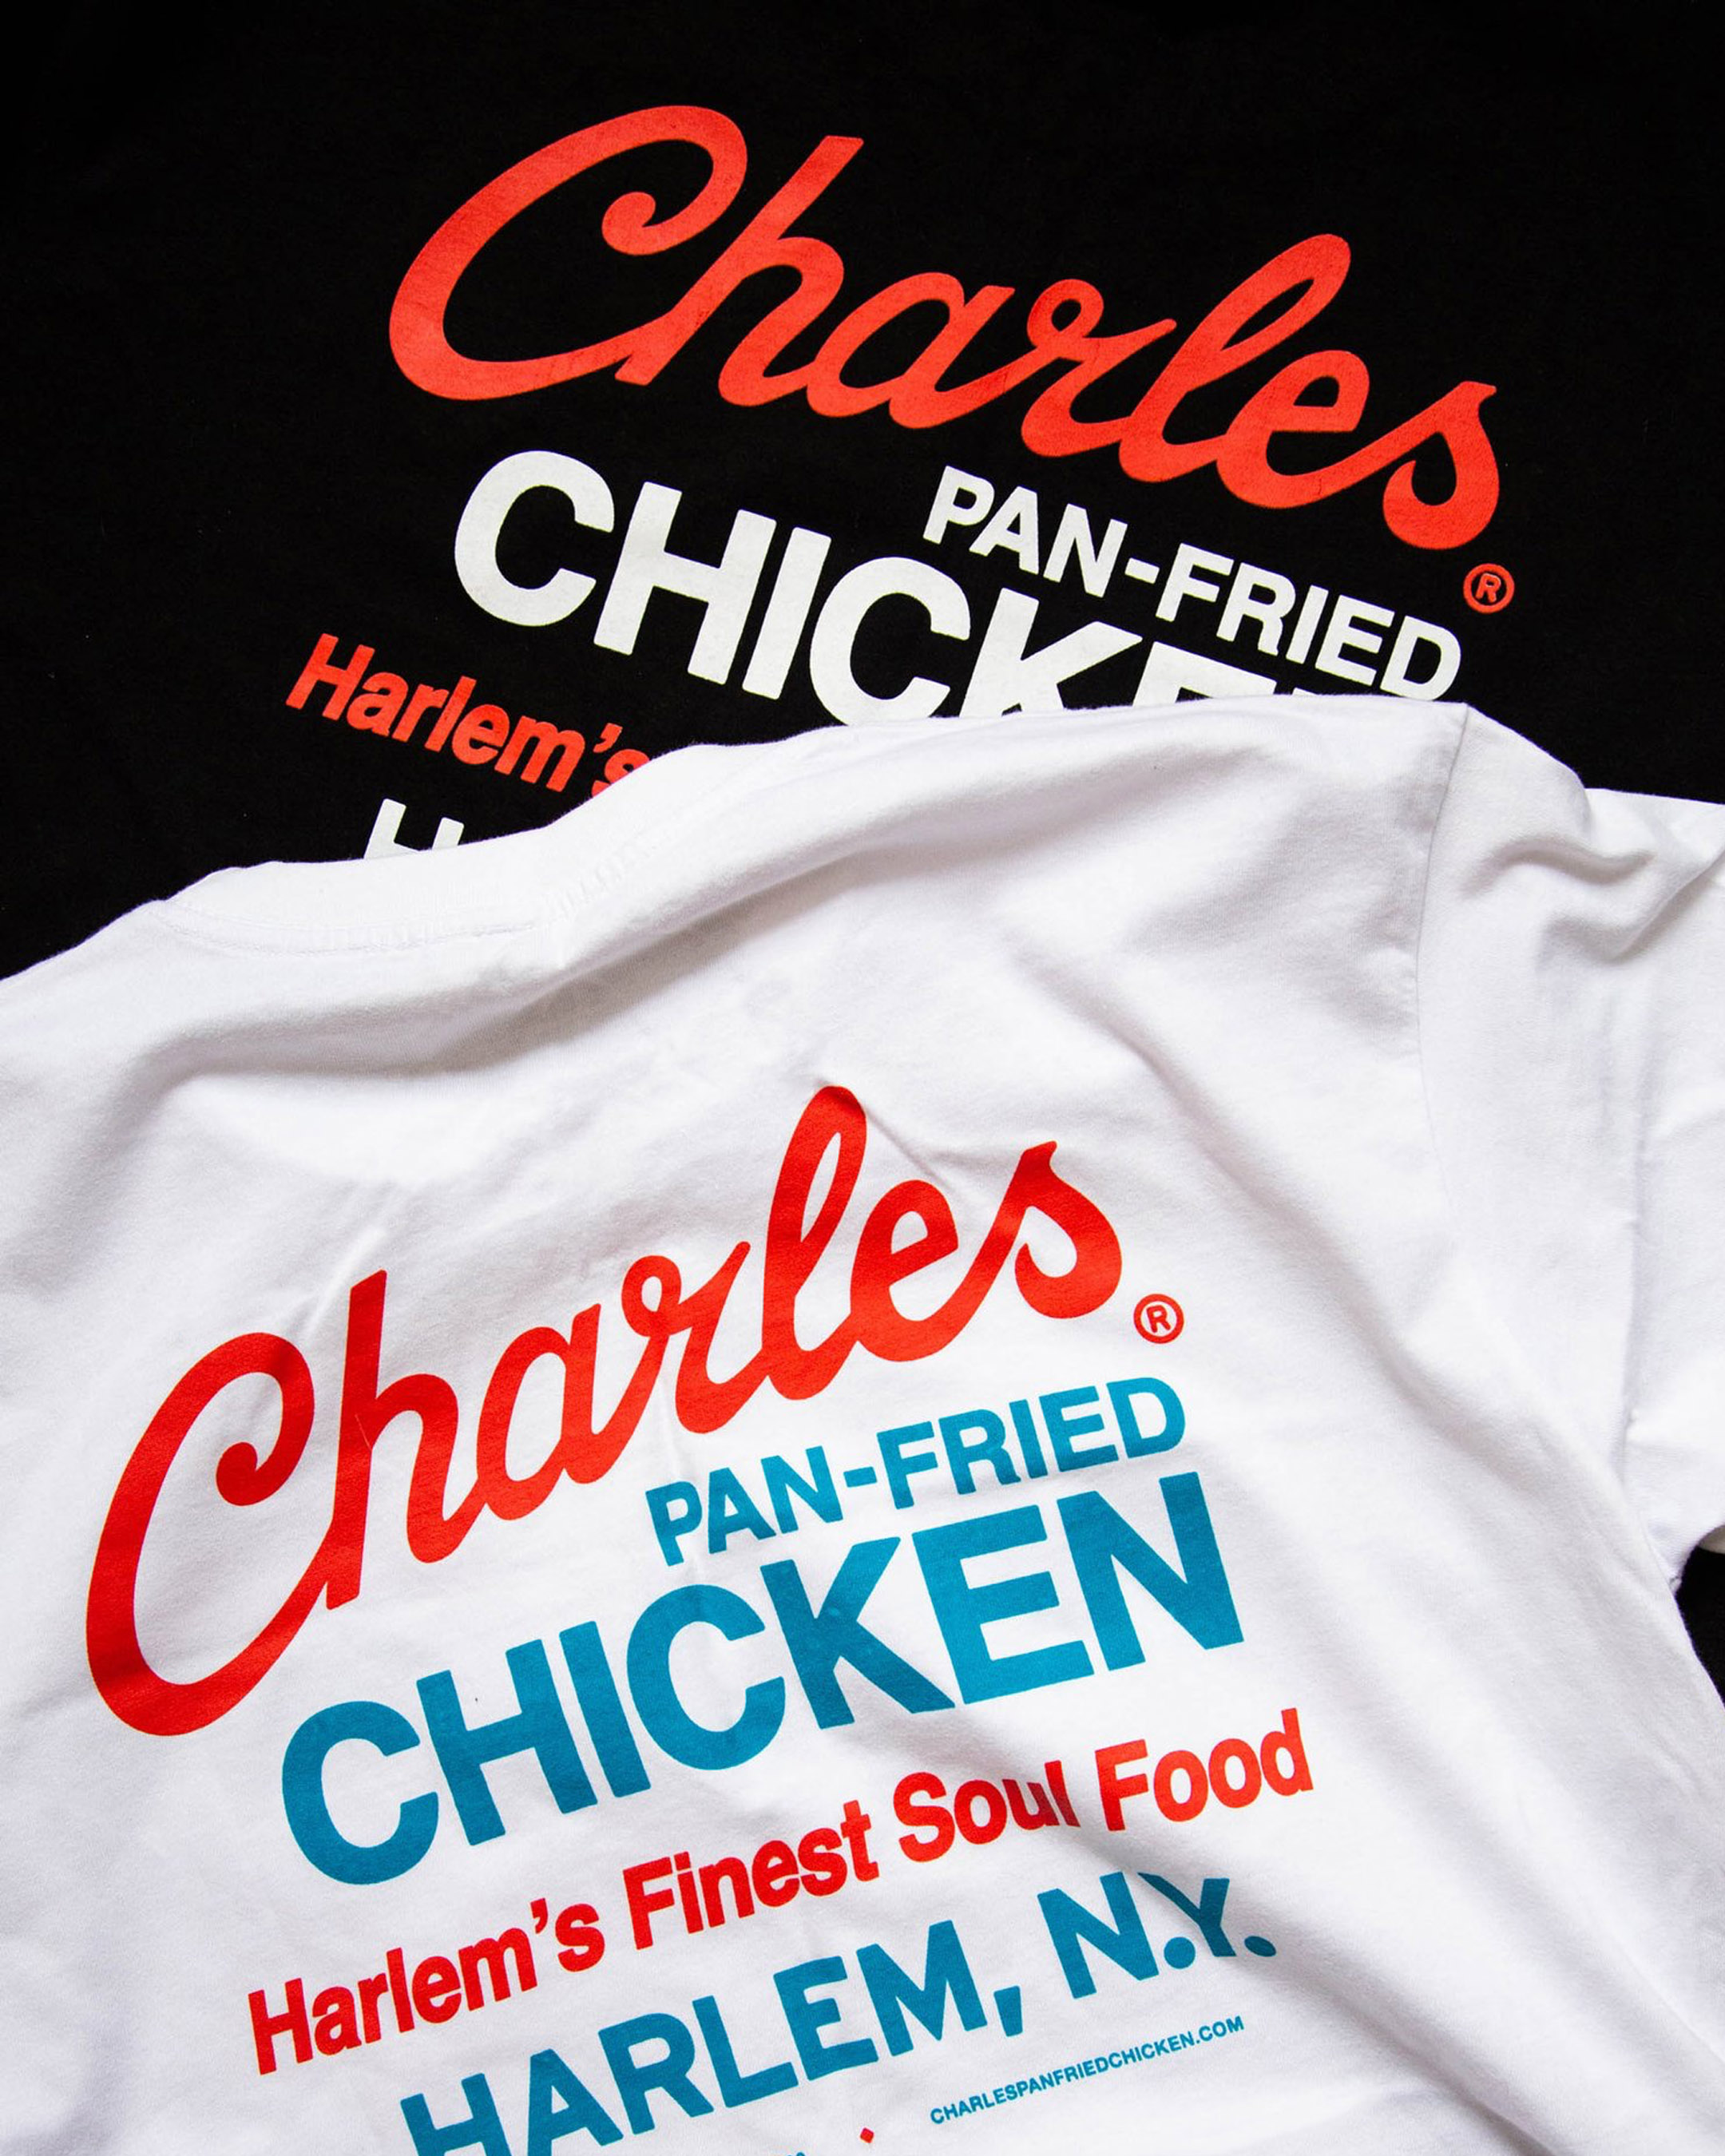 Nash Design rebrands a New York Soul Food icon in Charles Pan-Fried Chicken